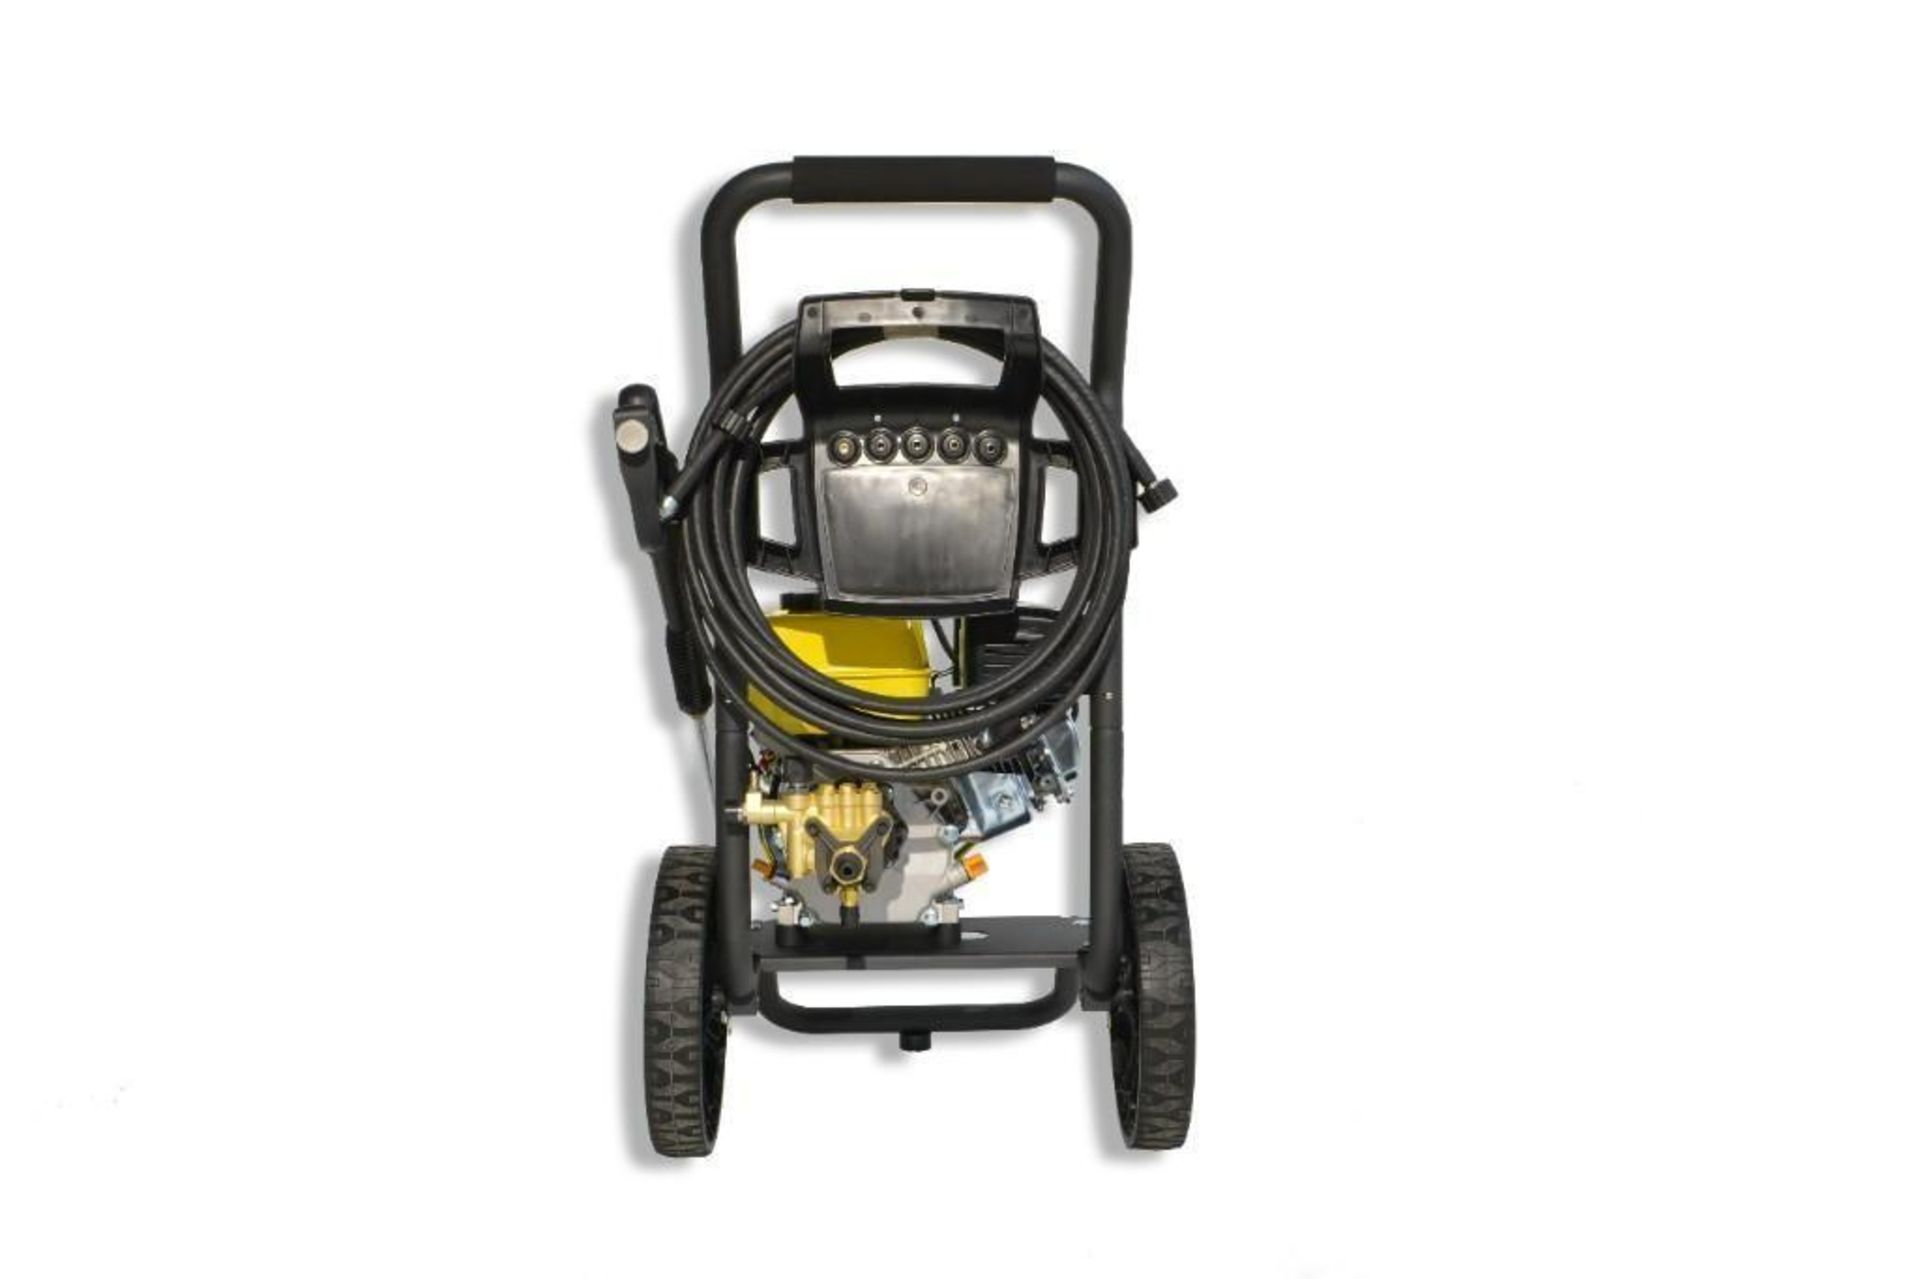 WASPPER PRESSURE WASHER - Image 5 of 5